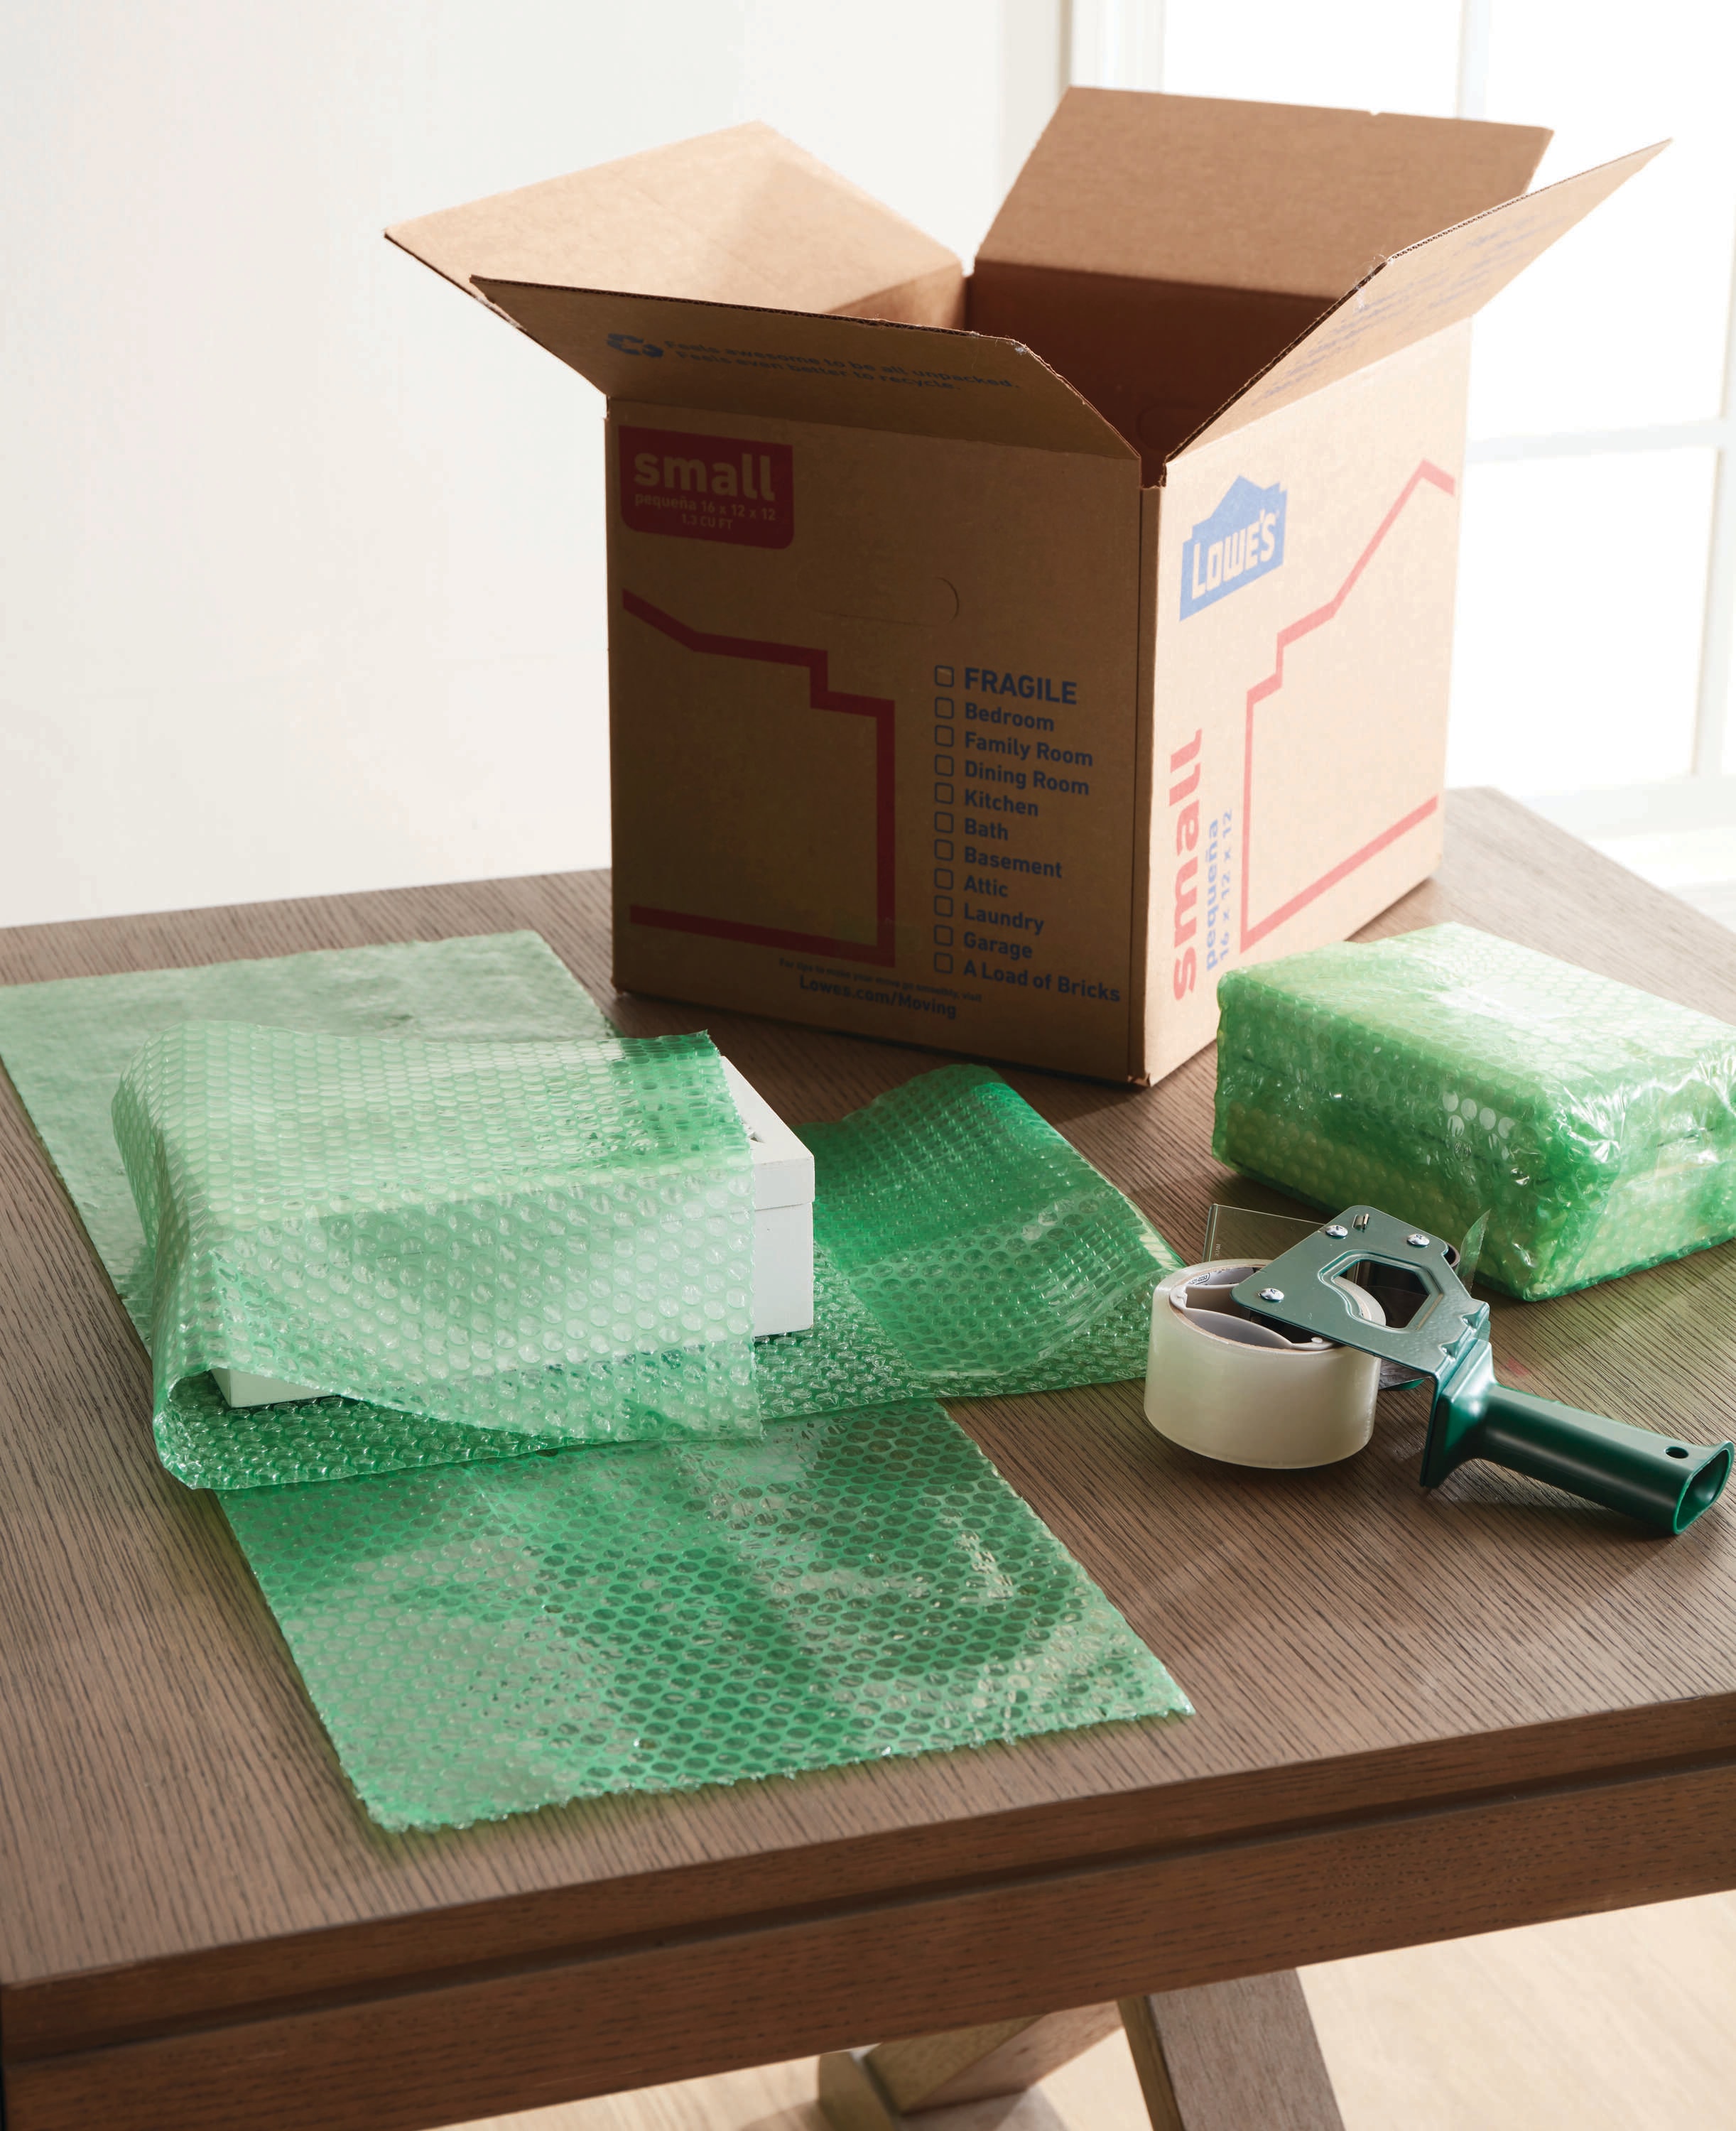 Bubble Cushion - Packing Supplies - The Home Depot